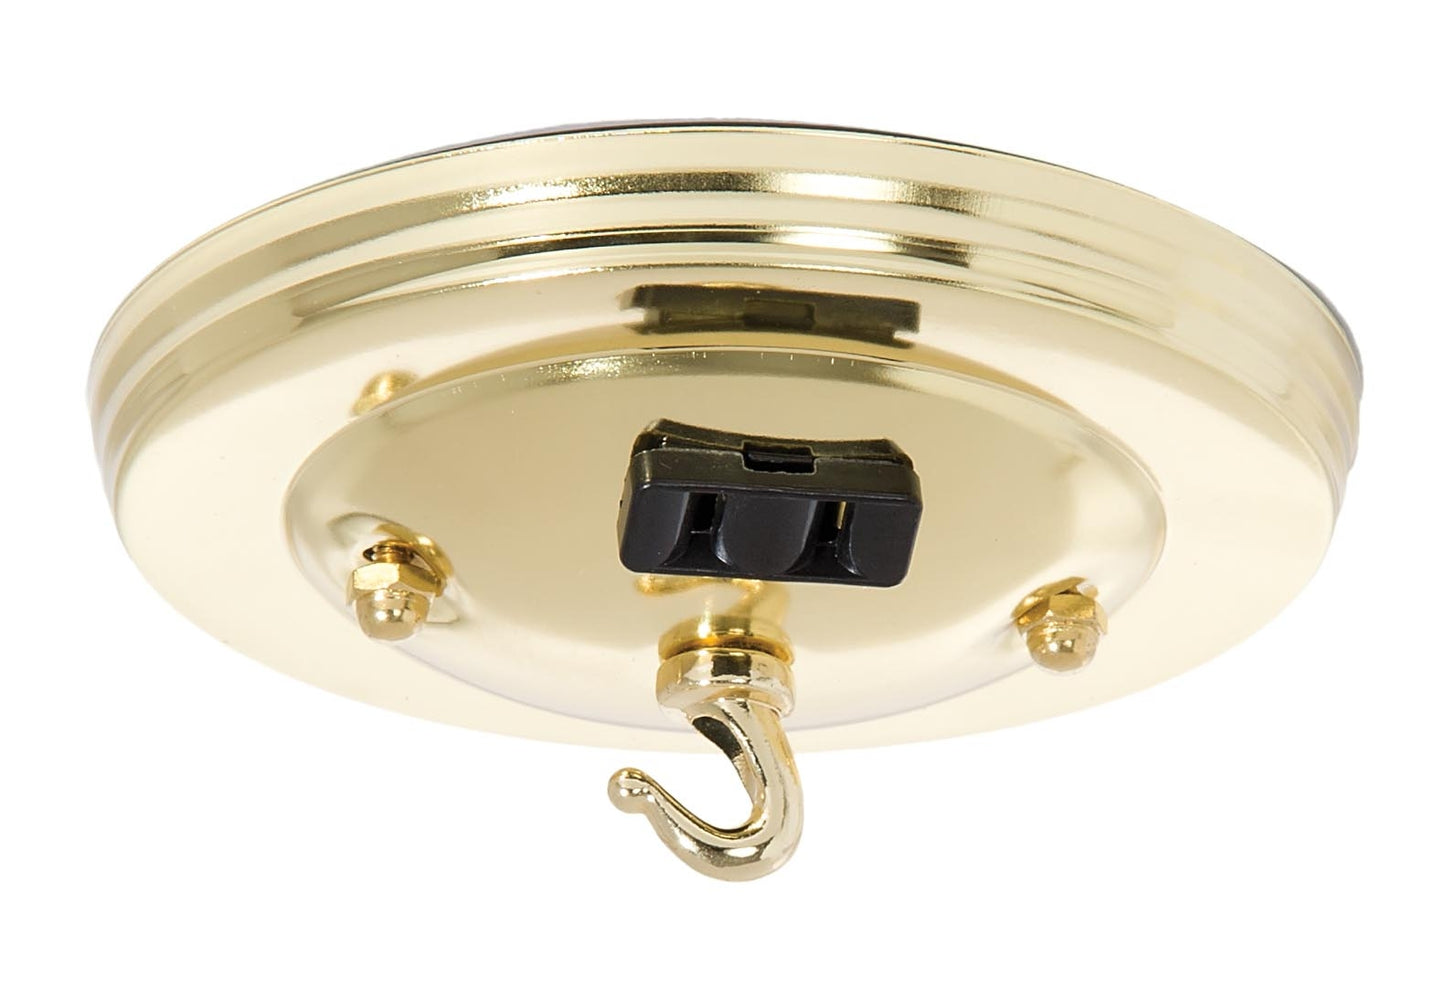 5" Dia. Canopy Kit with Convenience Outlet, 10 lb Max, Brass Plated